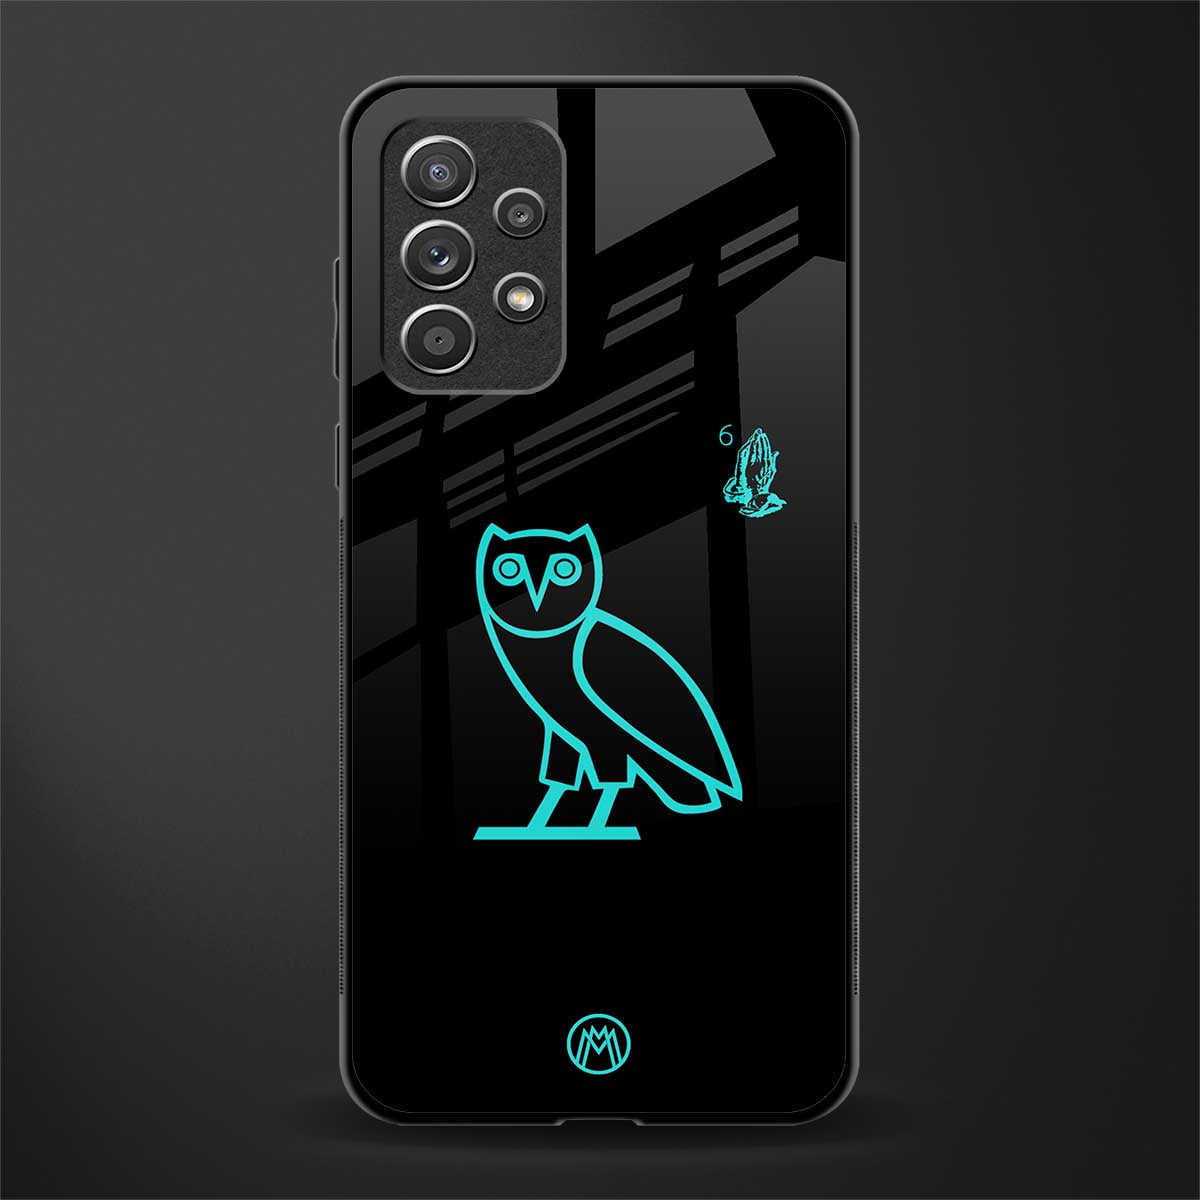 ovo glass case for samsung galaxy a52 image